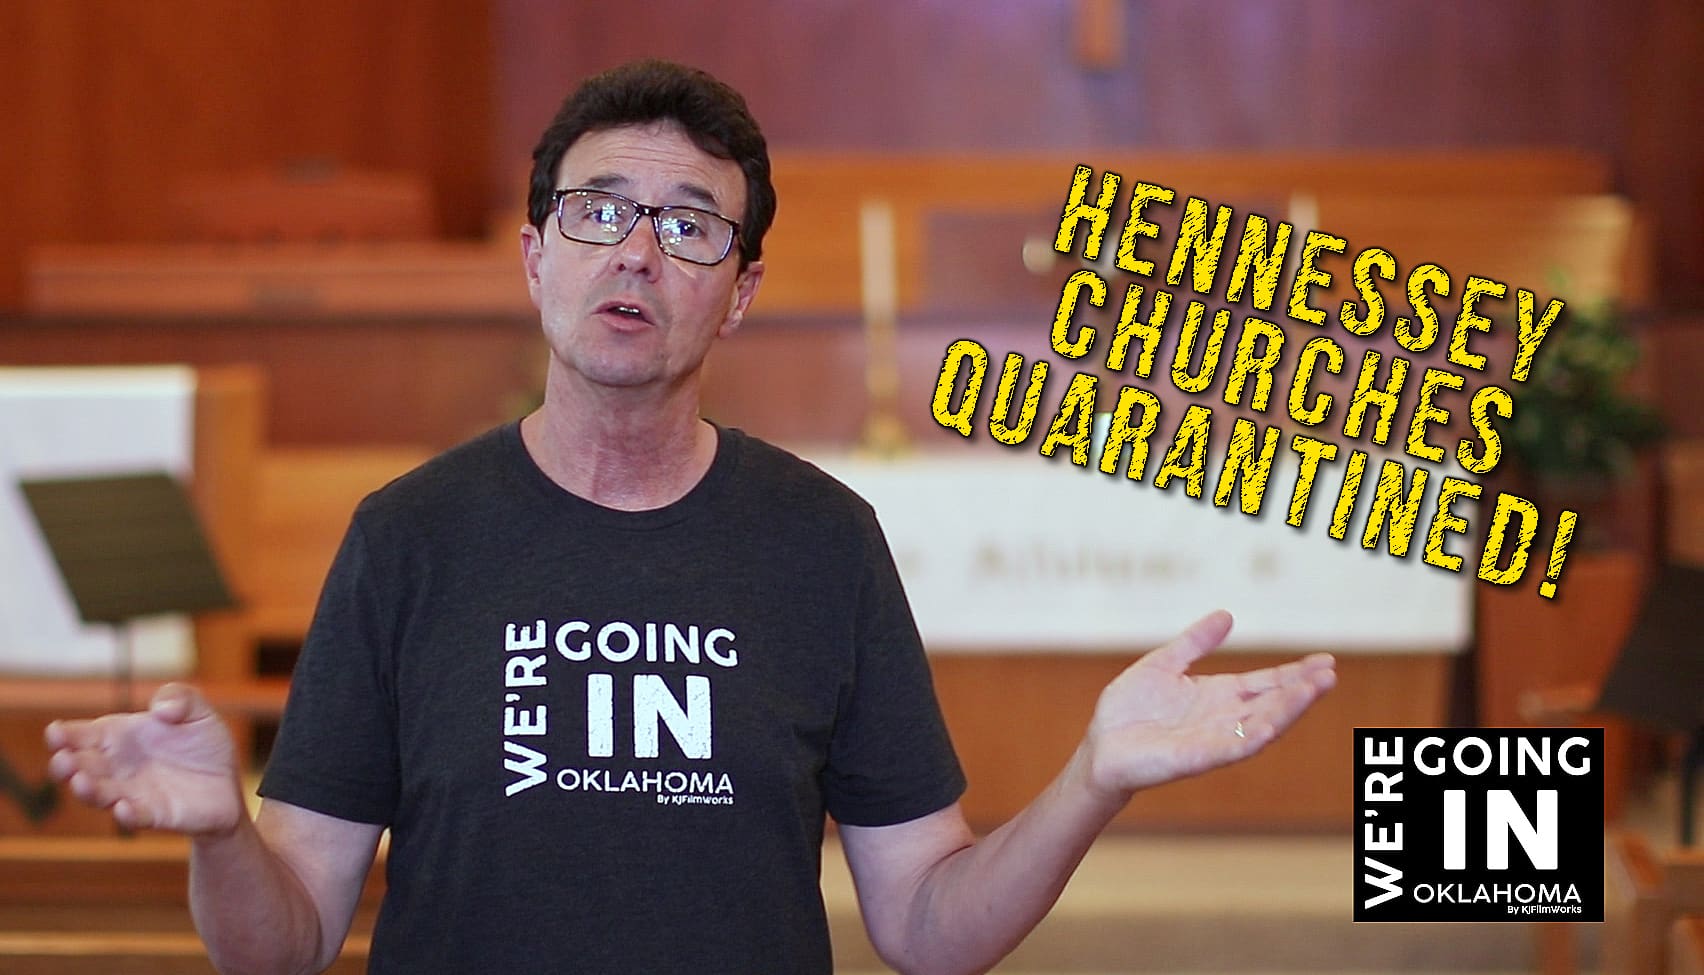 HENNESSEY CHURCHES QUARANTINED!